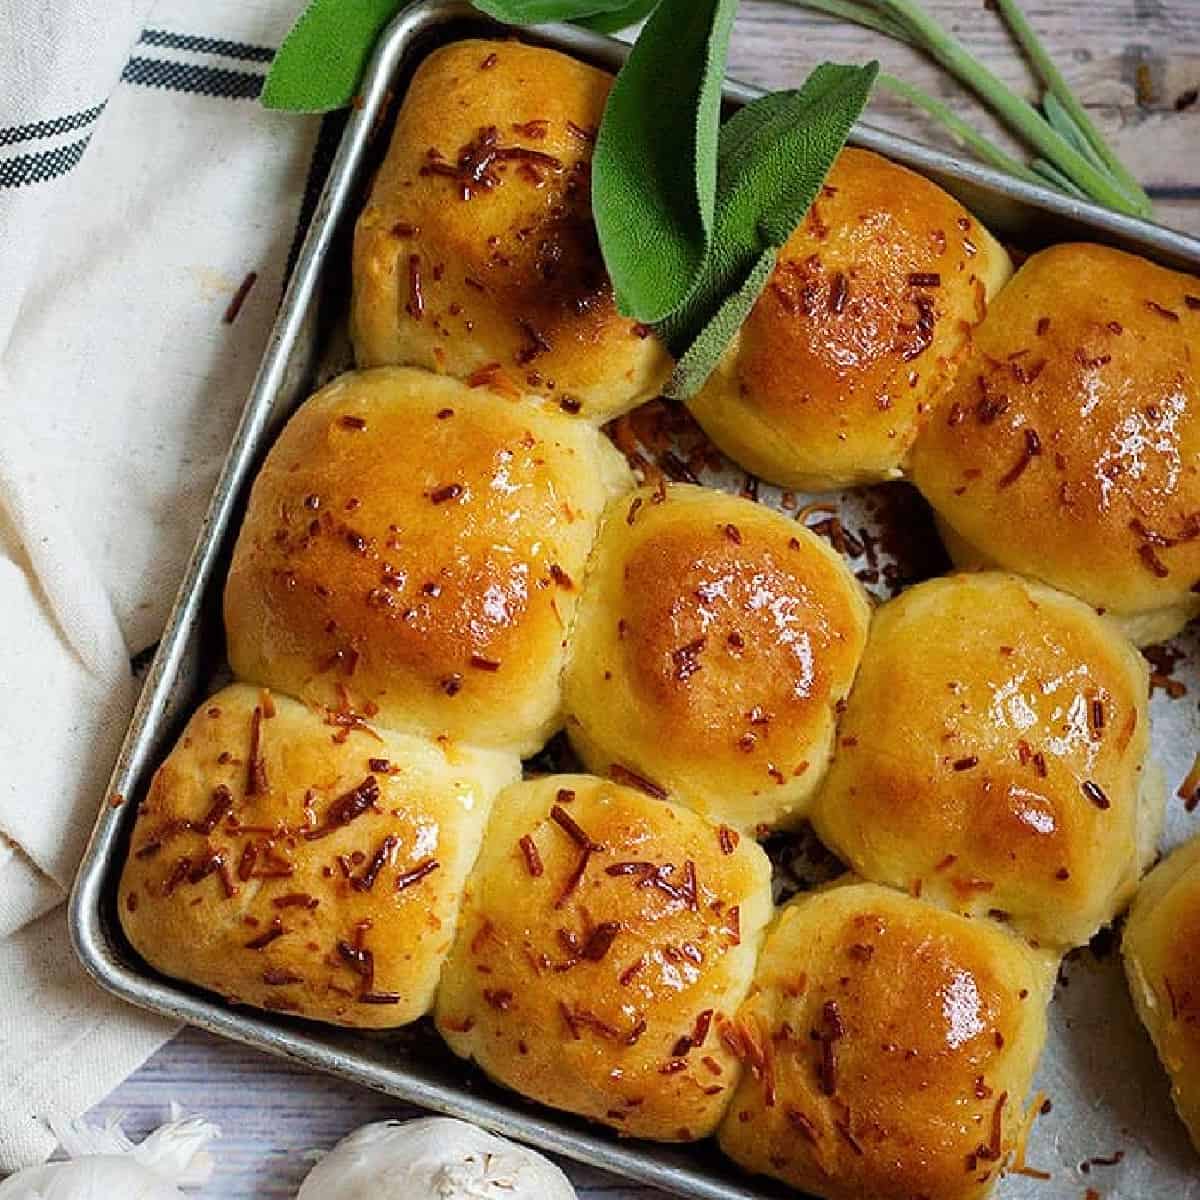 These Sage Parmesan Garlic Buns are the best buns you will ever make. Fluffy and buttery rolls topped with garlic and sage are too good to pass on!
